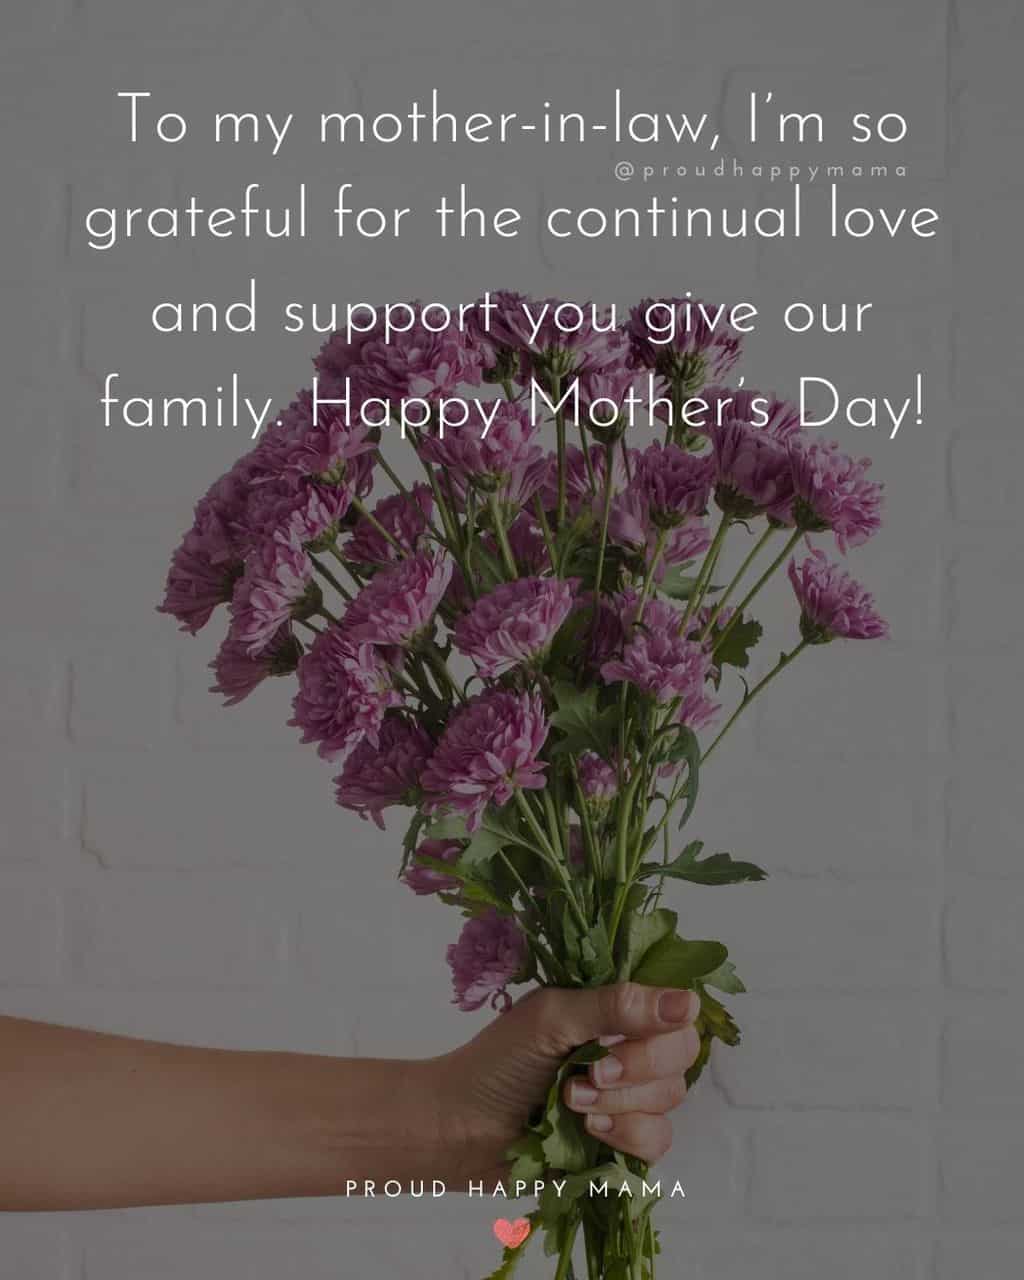 Happy Mothers Day Quotes For Mother In Law - To my mother in law, I’m so grateful for the continual love and support you give our family.